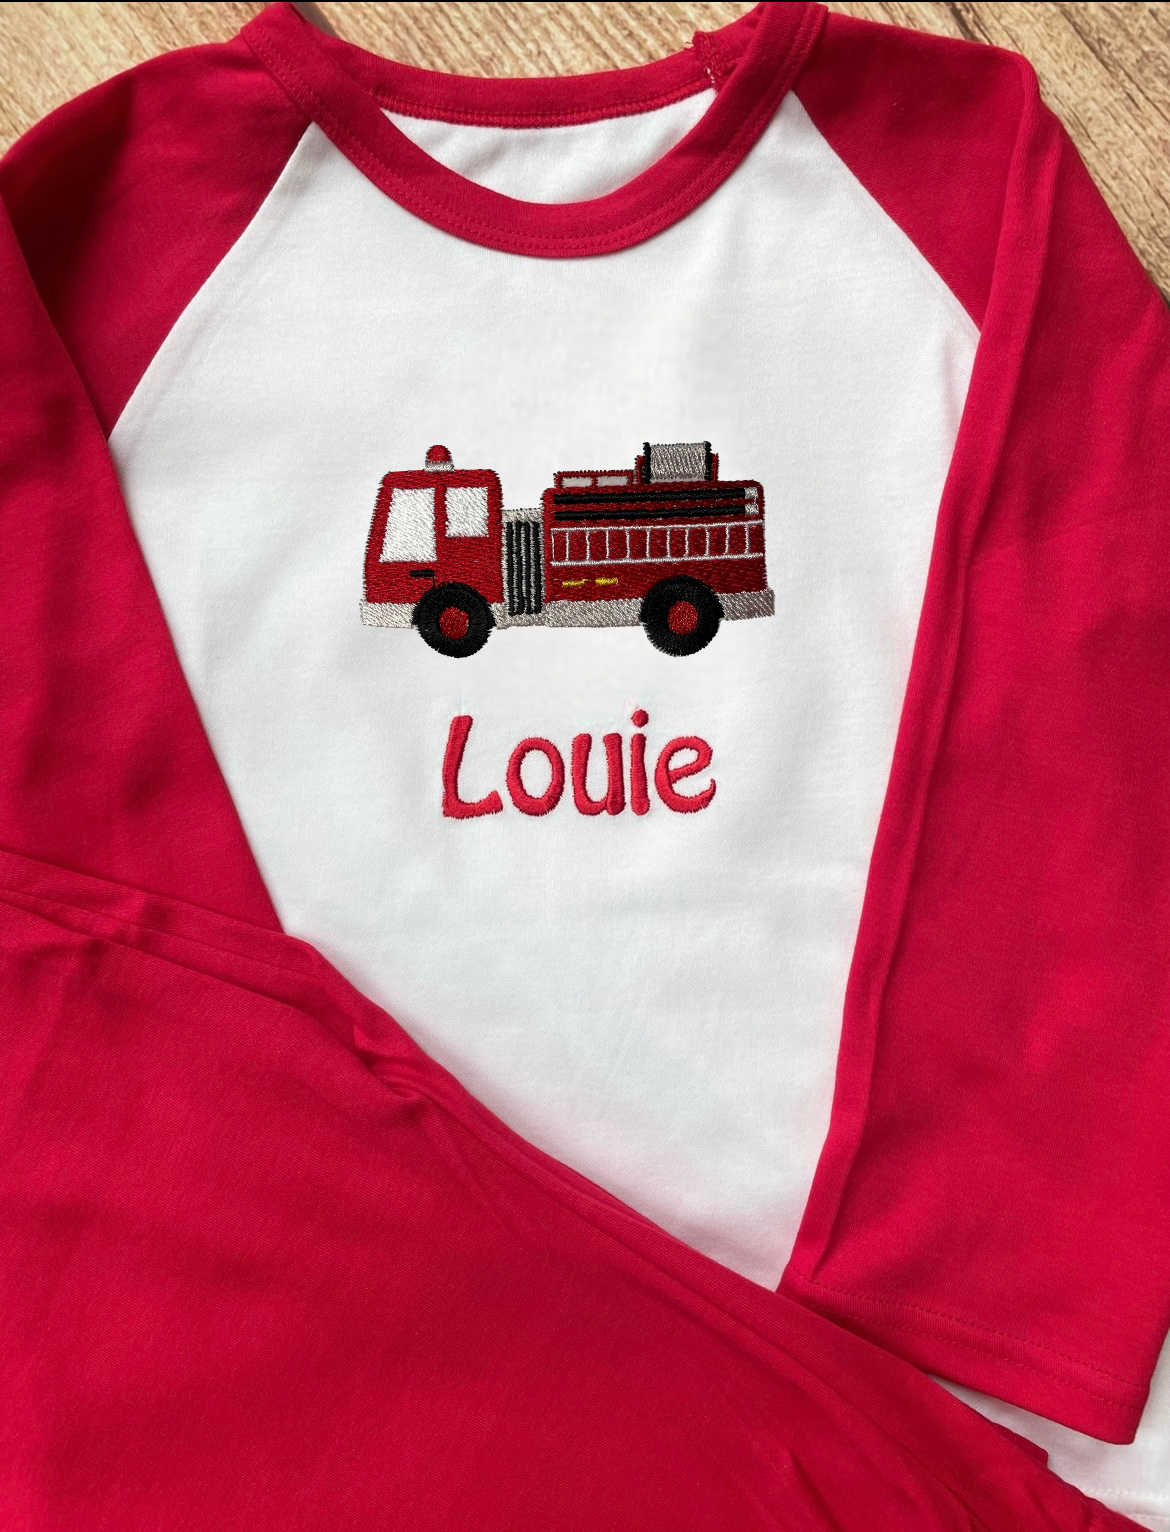 Personalised Pyjamas, embroidered with name & choice of transport design. Gift, keepsake, high quality, soft, PJ's